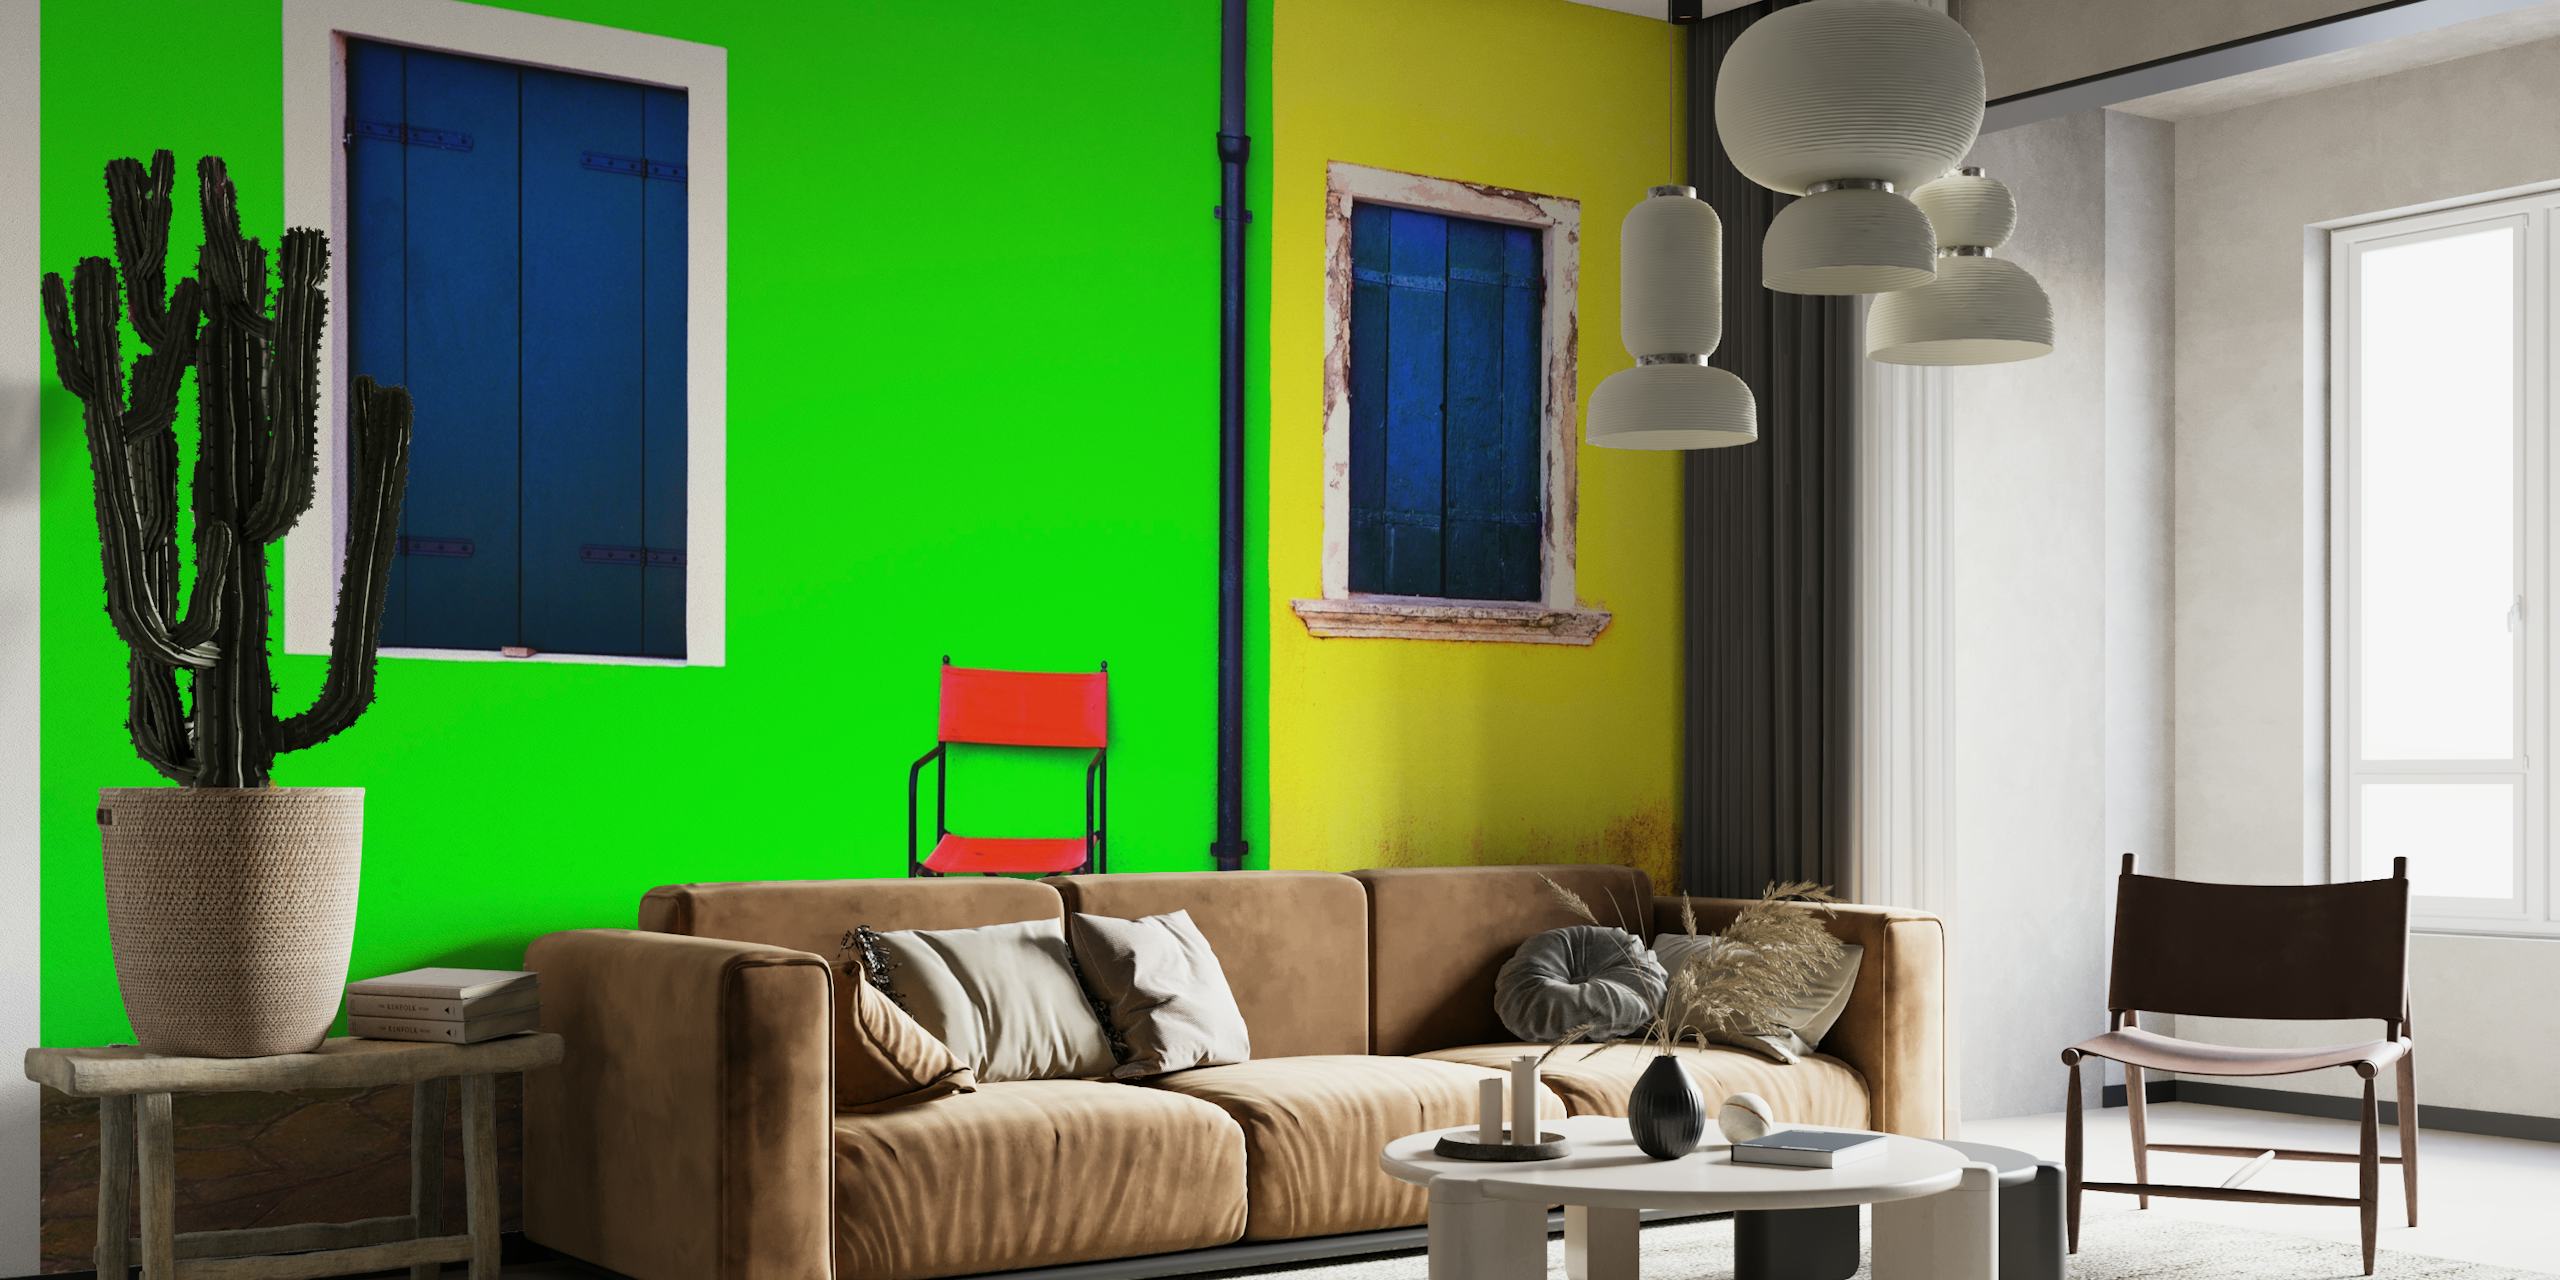 Bold and minimalistic wall mural featuring a green wall with a blue window, a yellow wall with a blue window, and a red chair